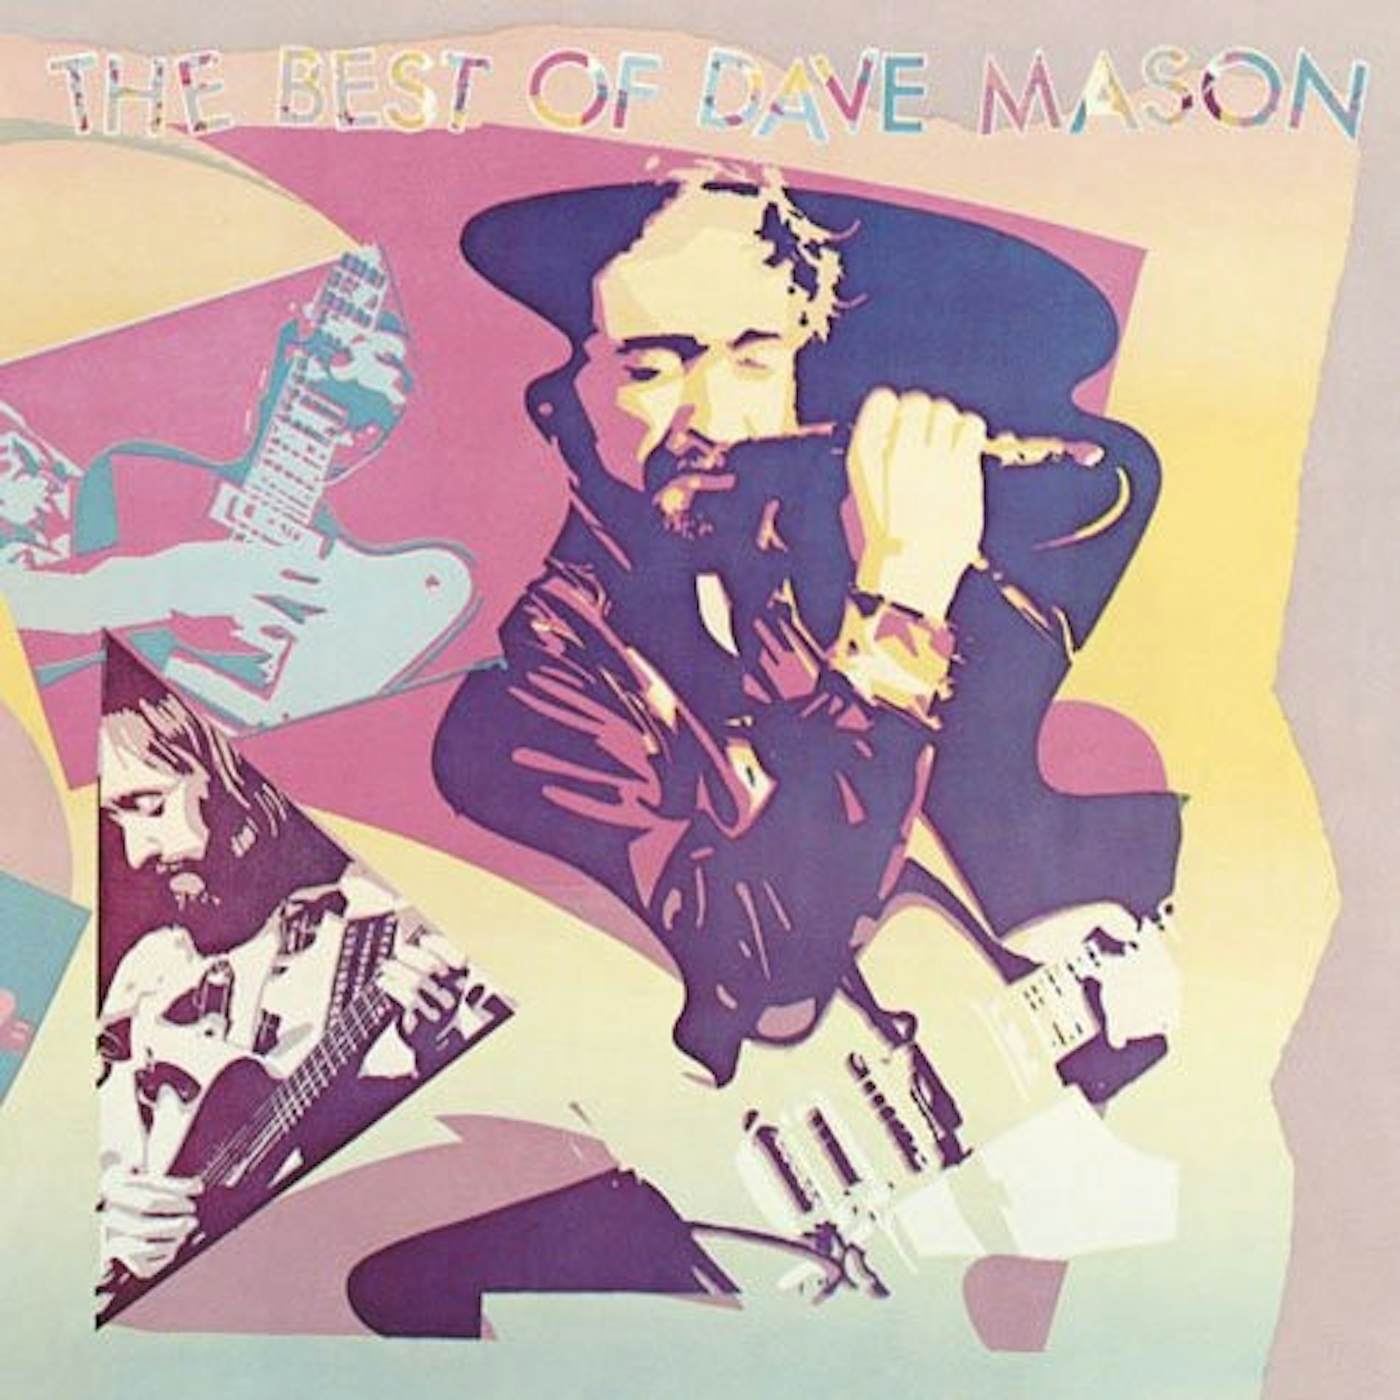 Dave Mason BEST OF (LIMITED) CD